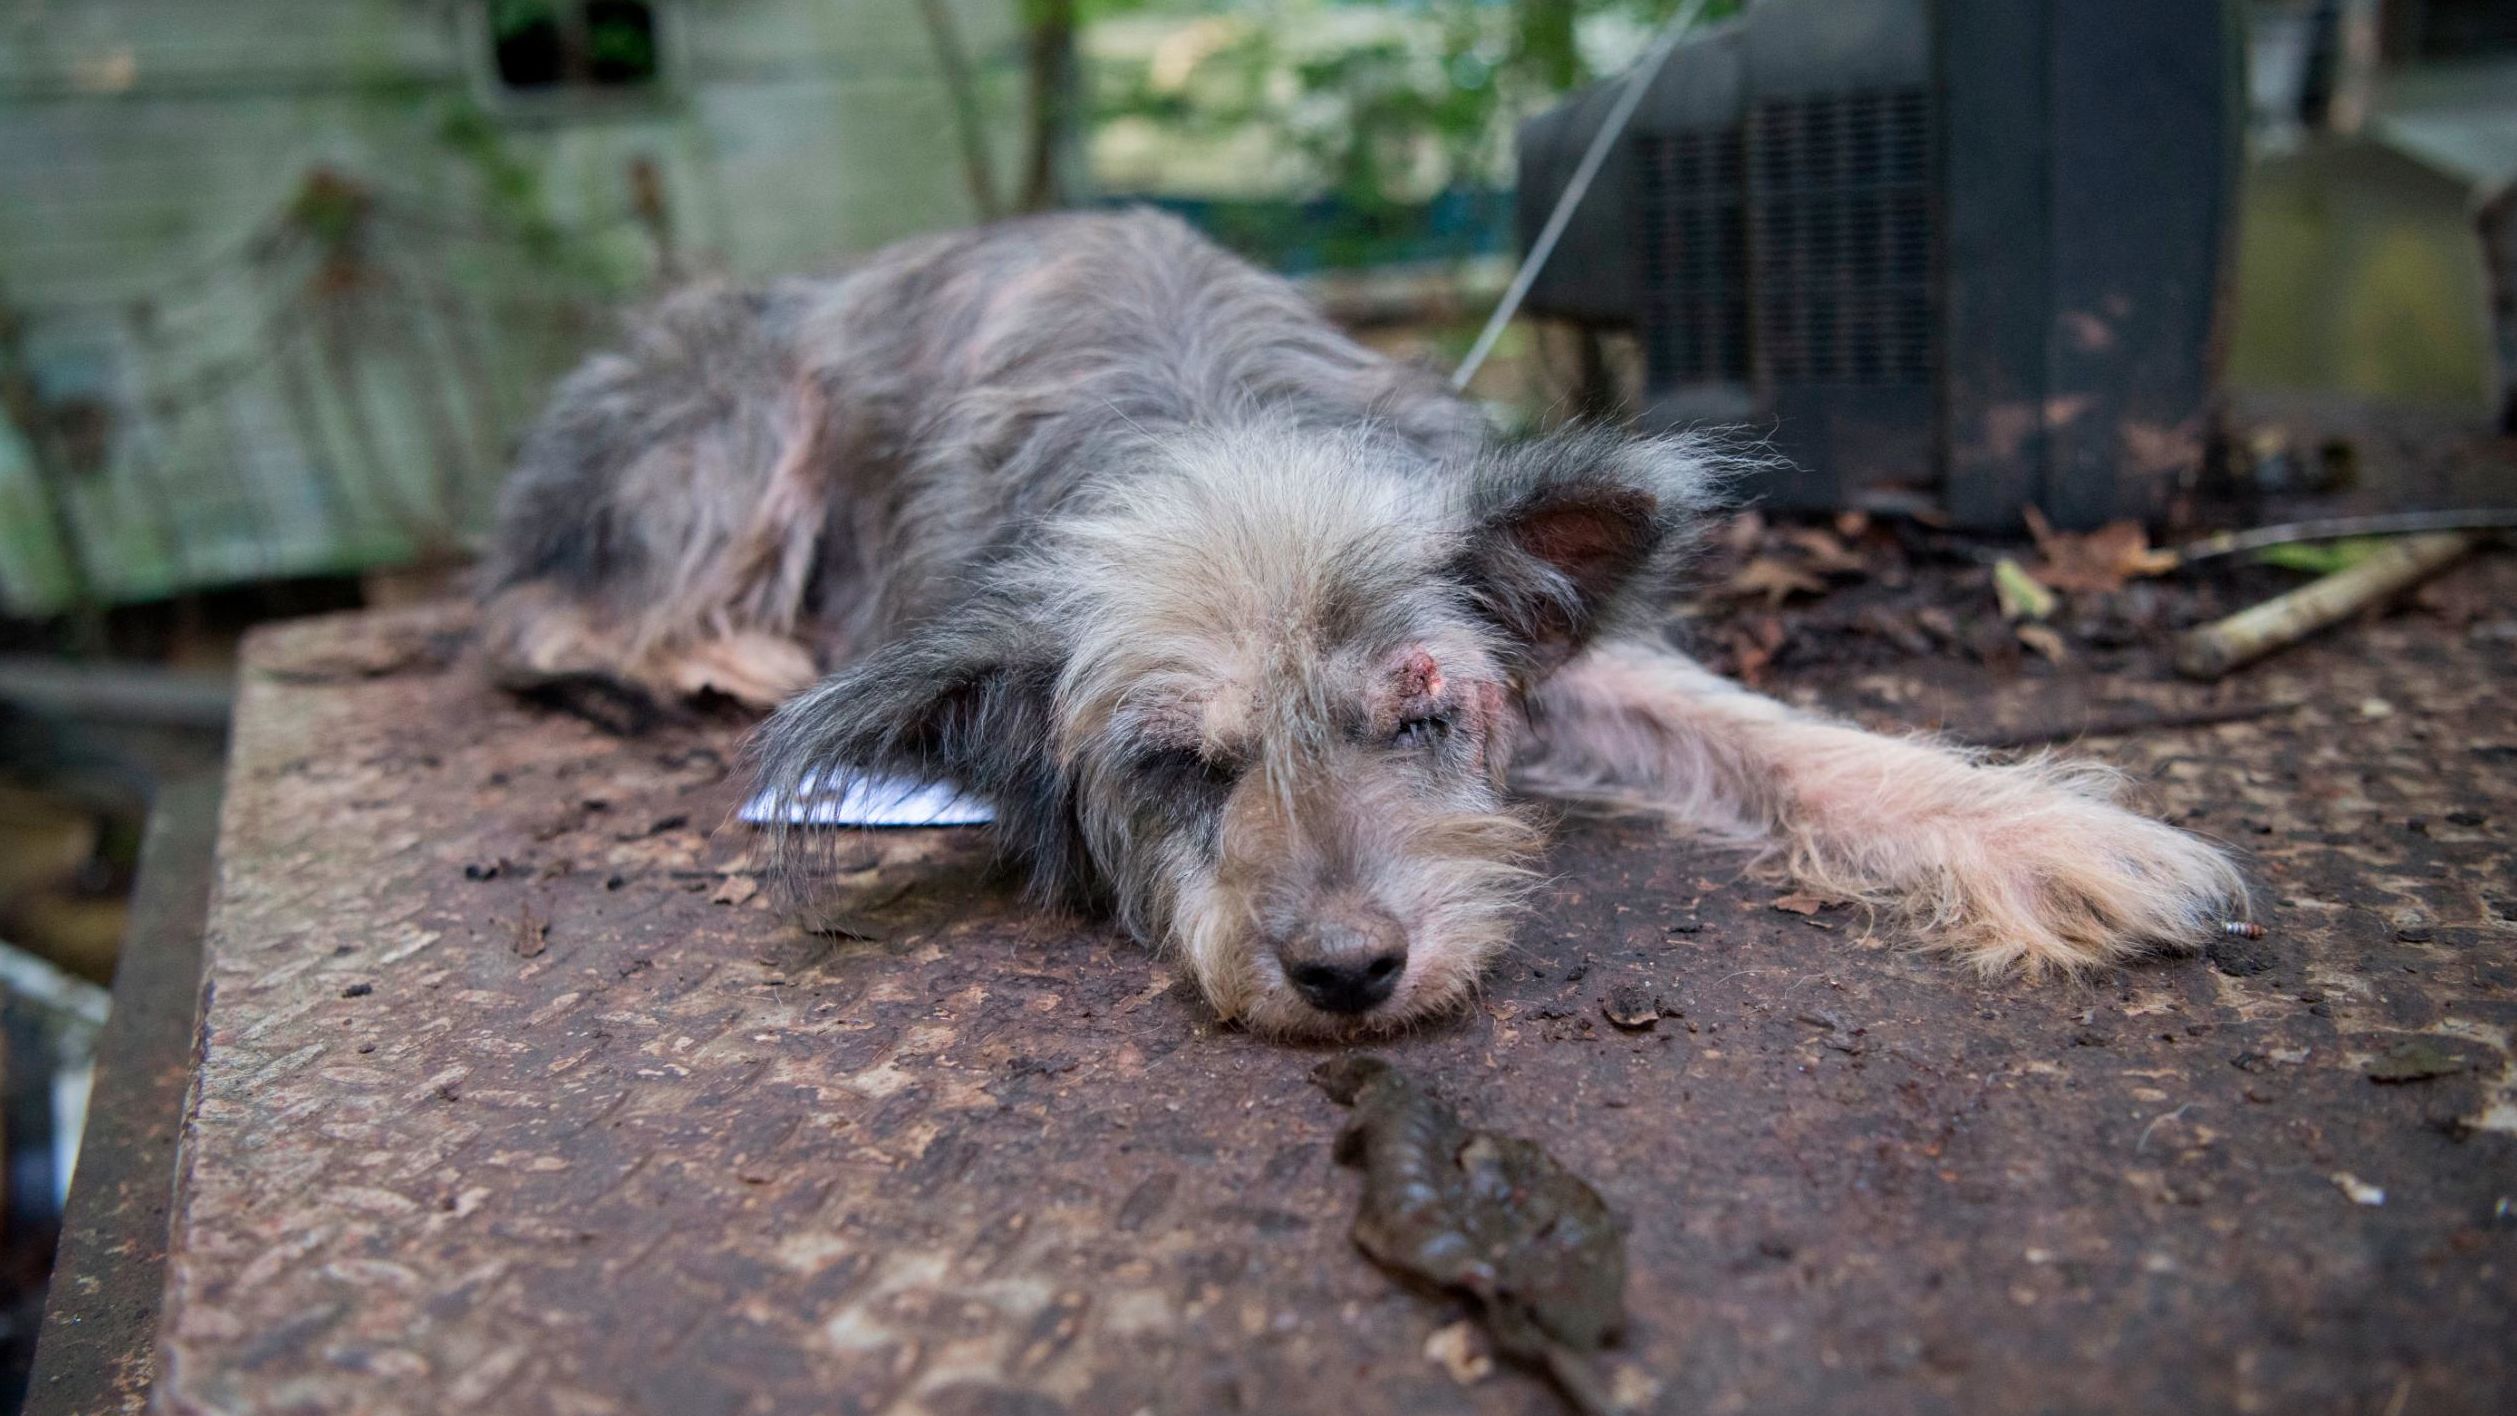 One of more than 60 dogs in a suspected cruelty case in Jefferson County Arkansas in 2016.